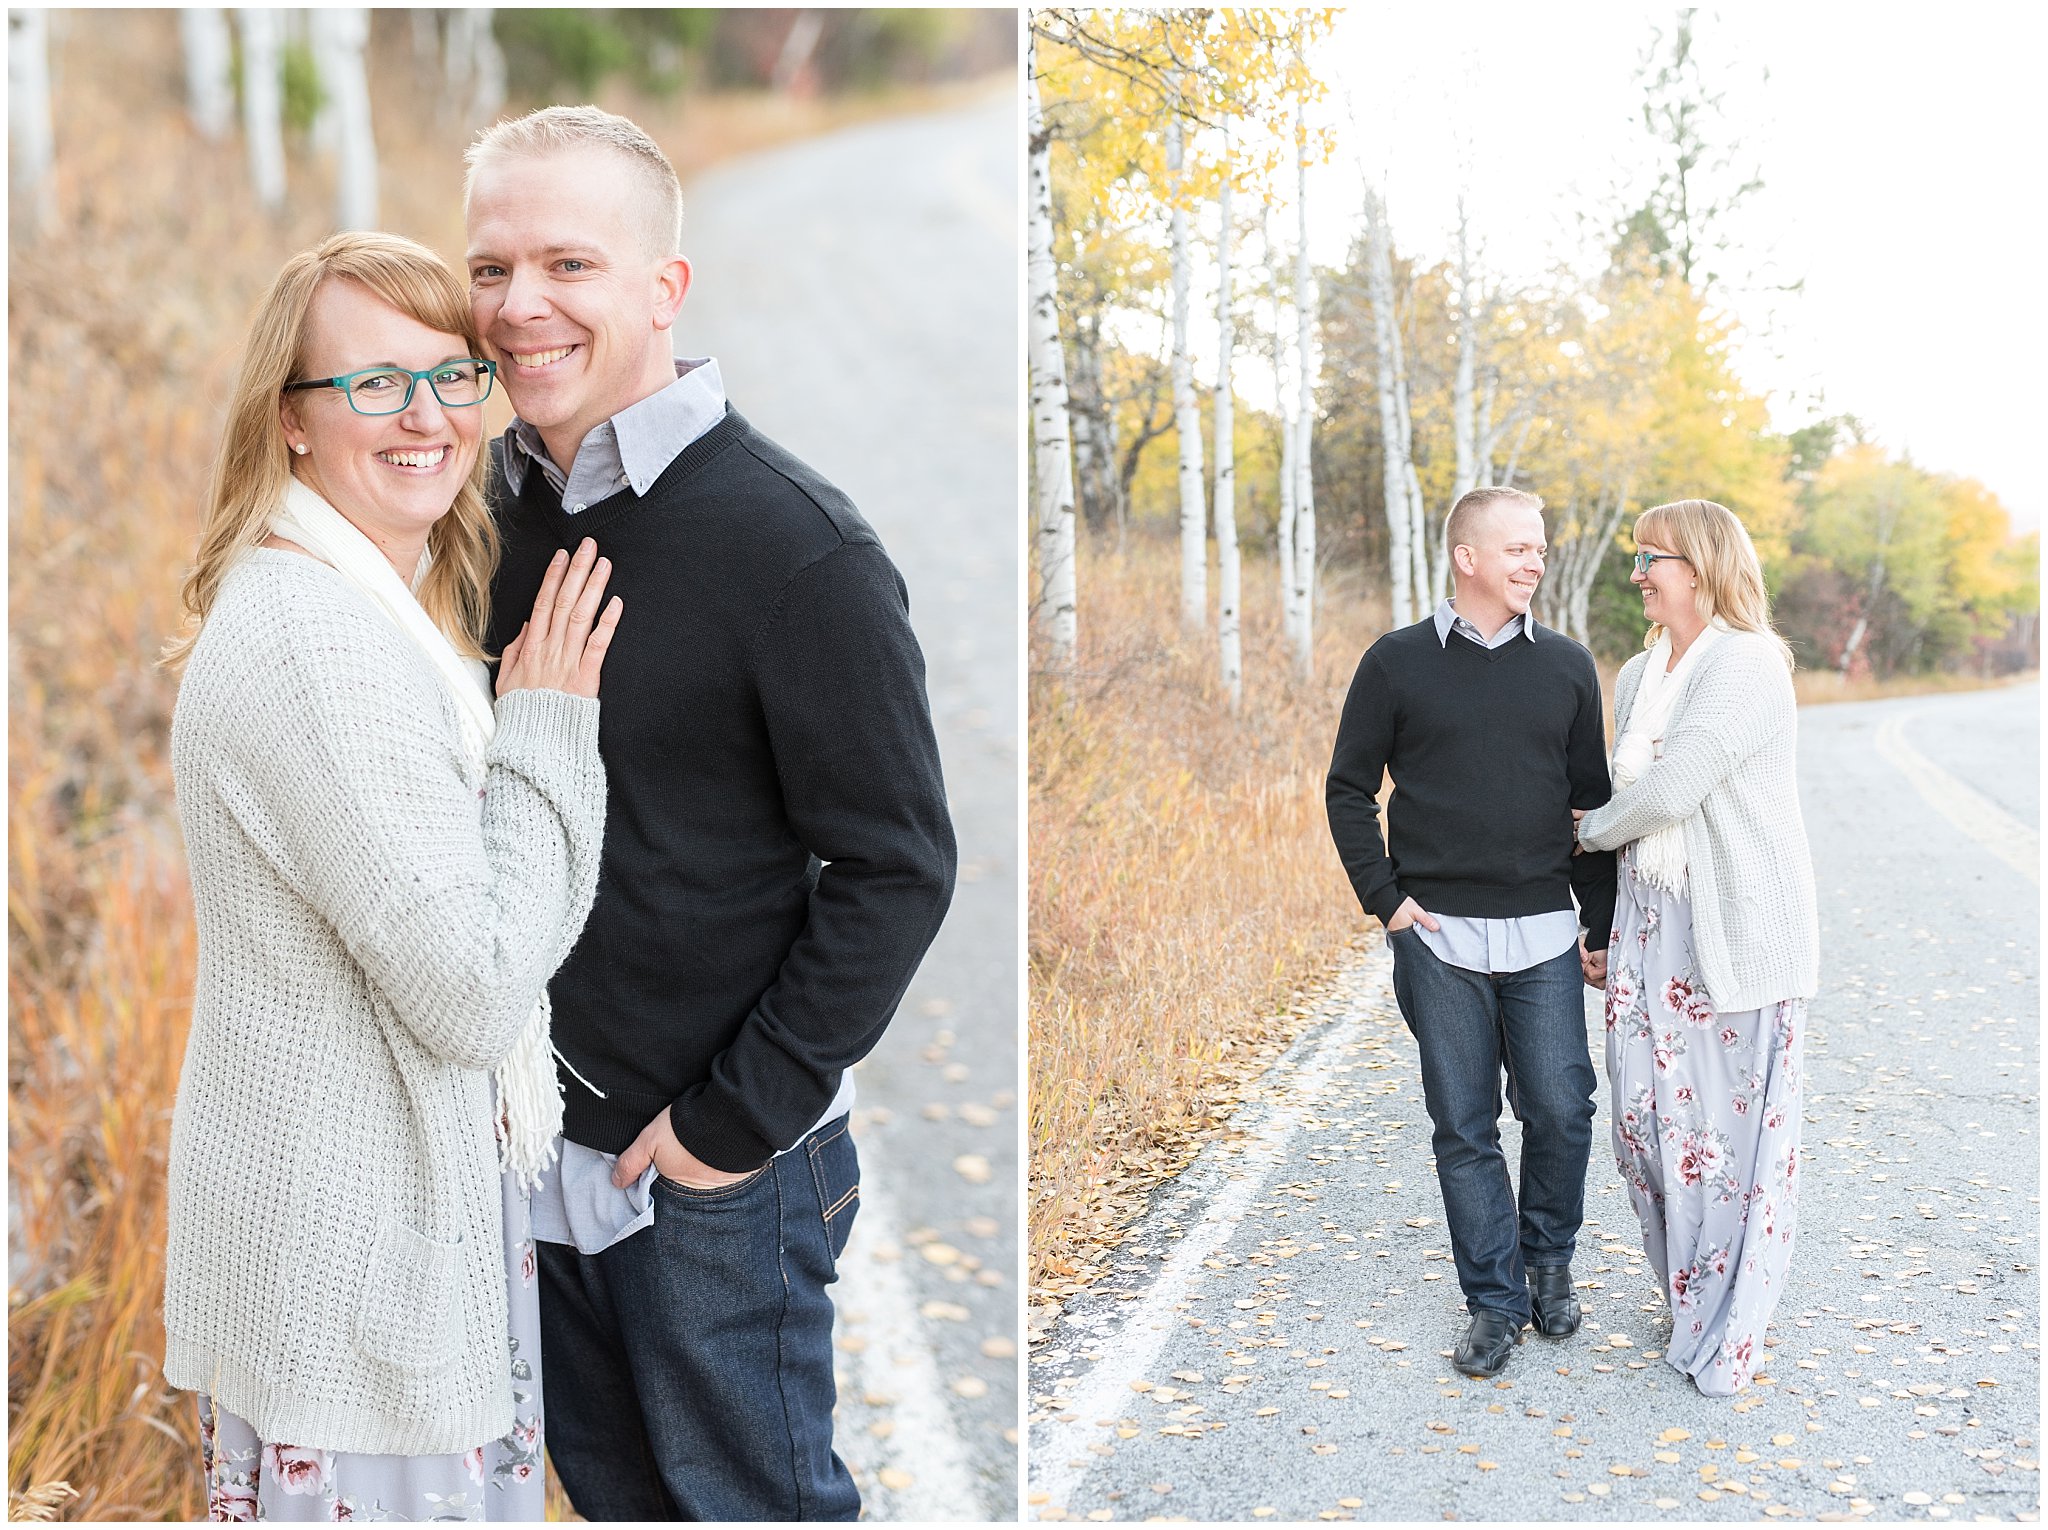 Couple smiling and walking in the fall leaves and aspen trees | Fall Family Pictures in the Mountains | Snowbasin, Utah | Jessie and Dallin Photography